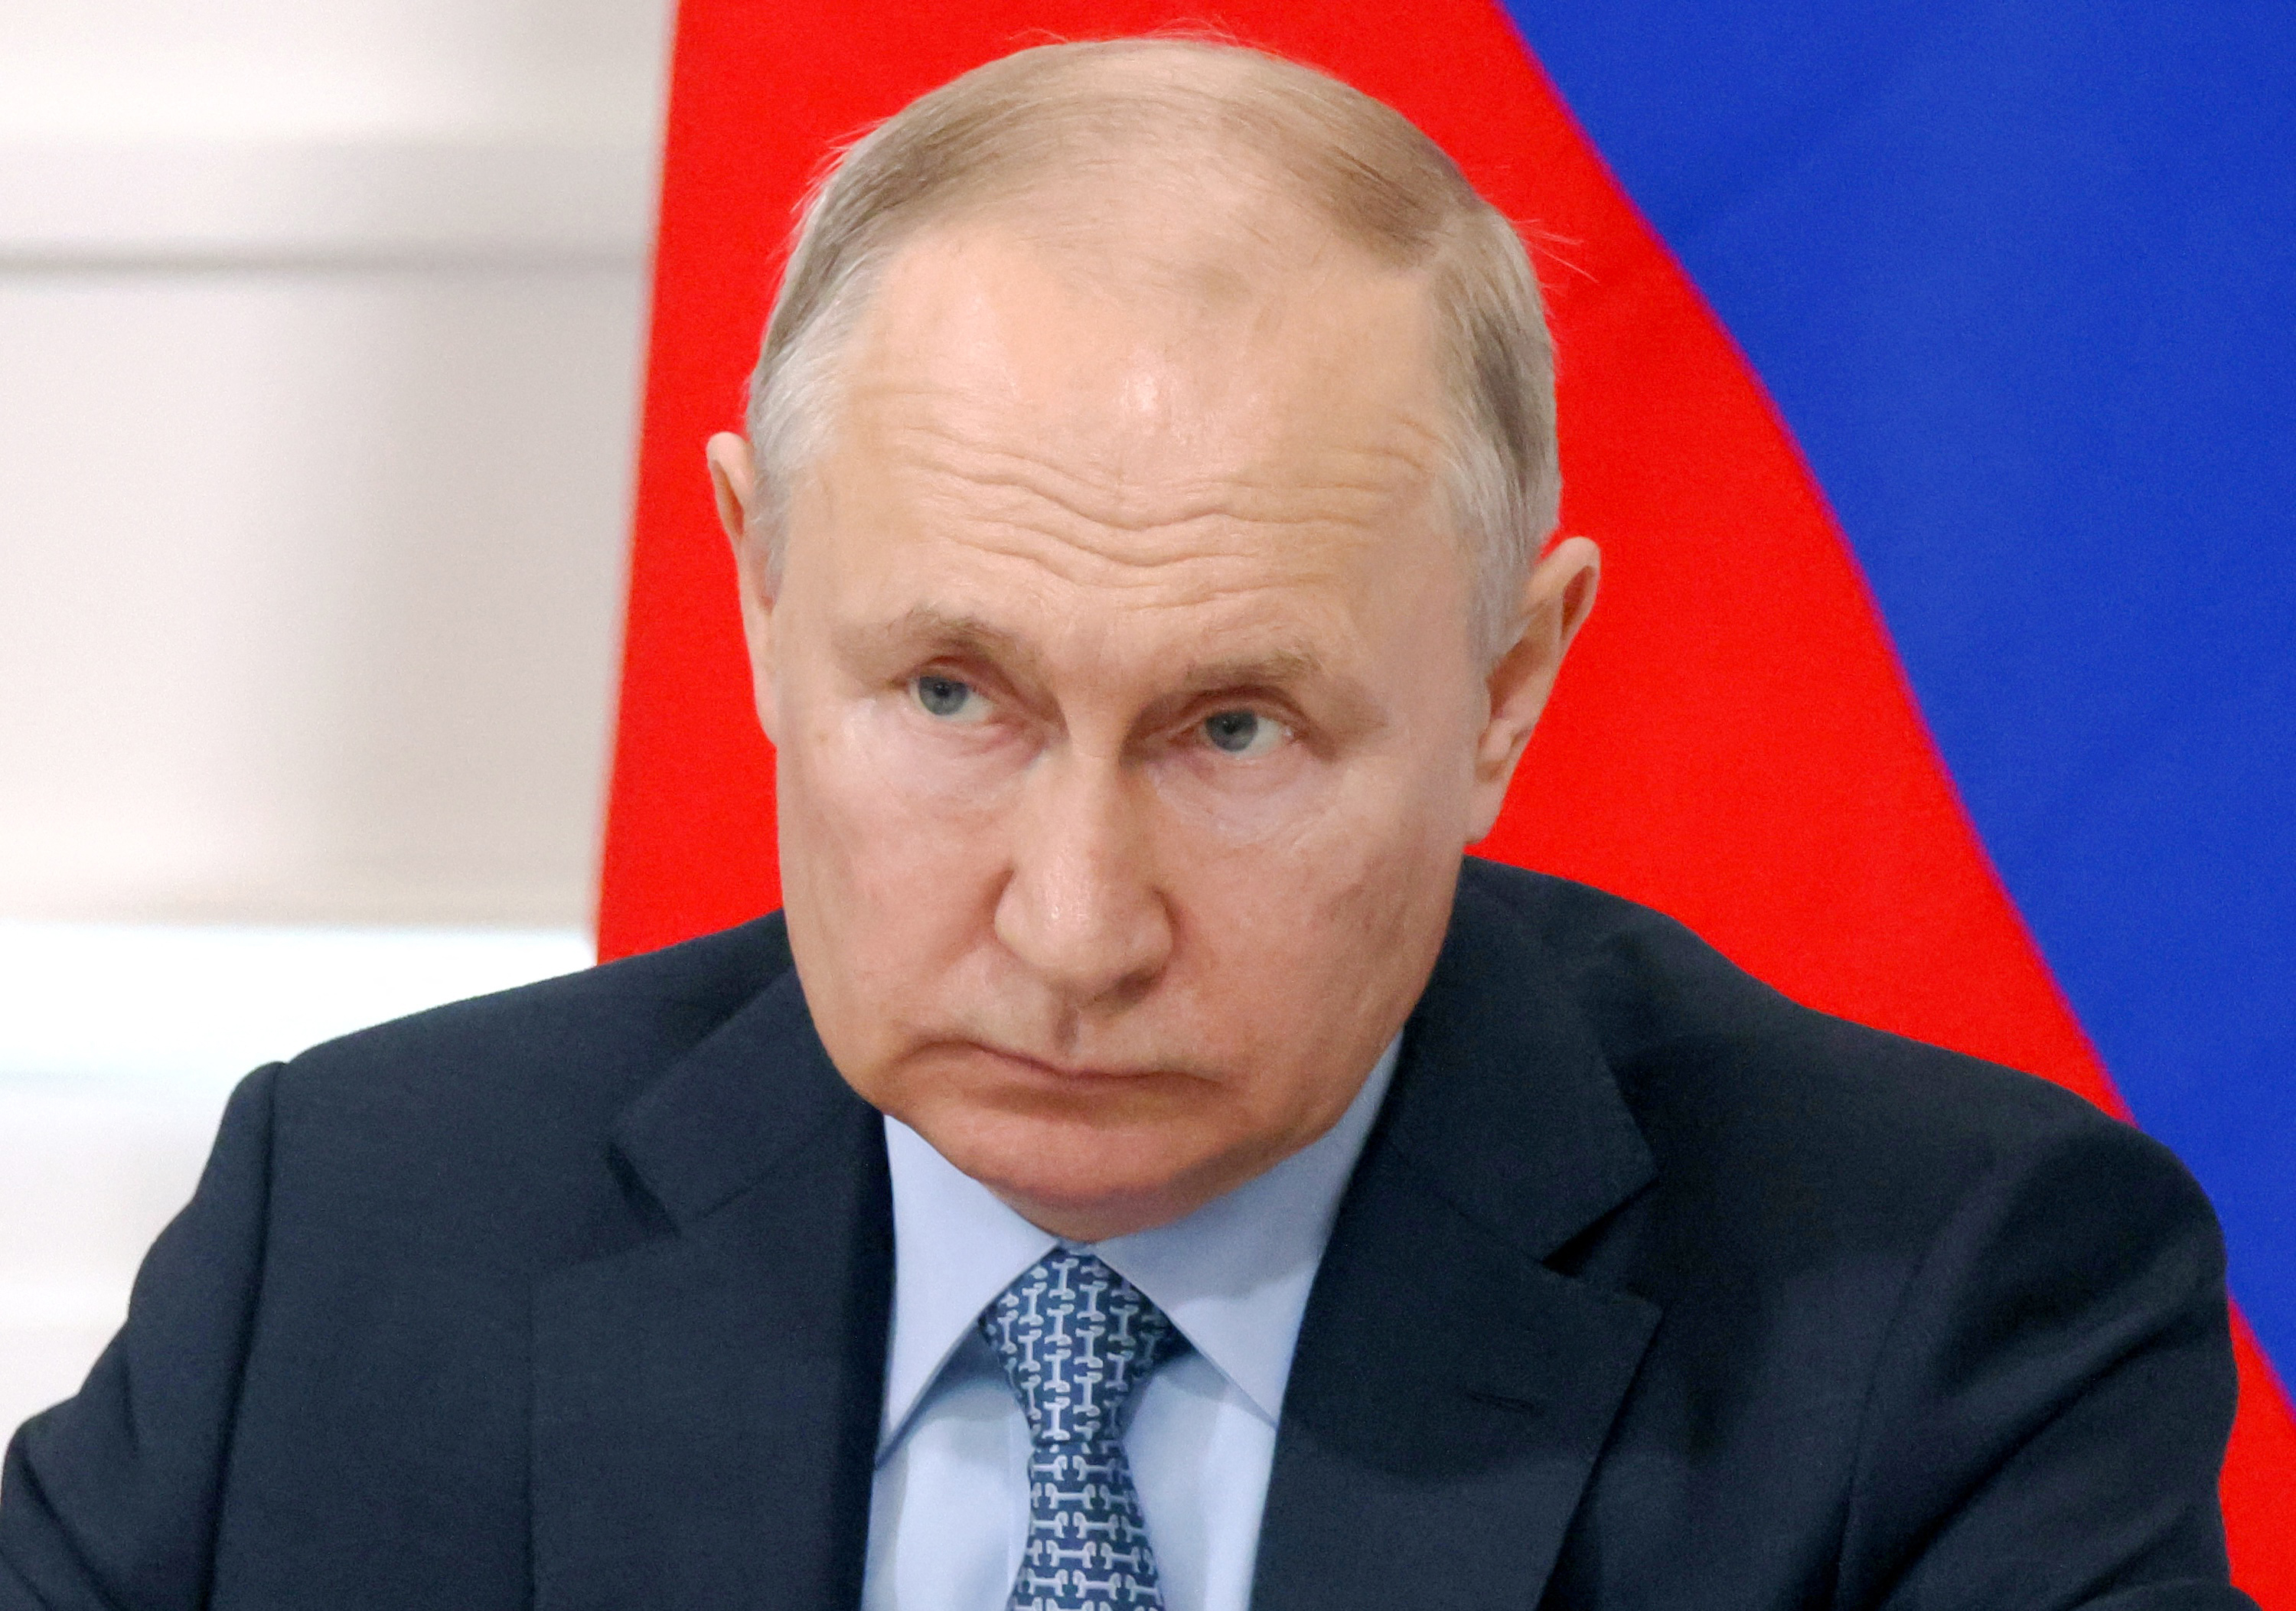 Russian President Vladimir Putin speaks at a government meeting in Moscow, on June 20.